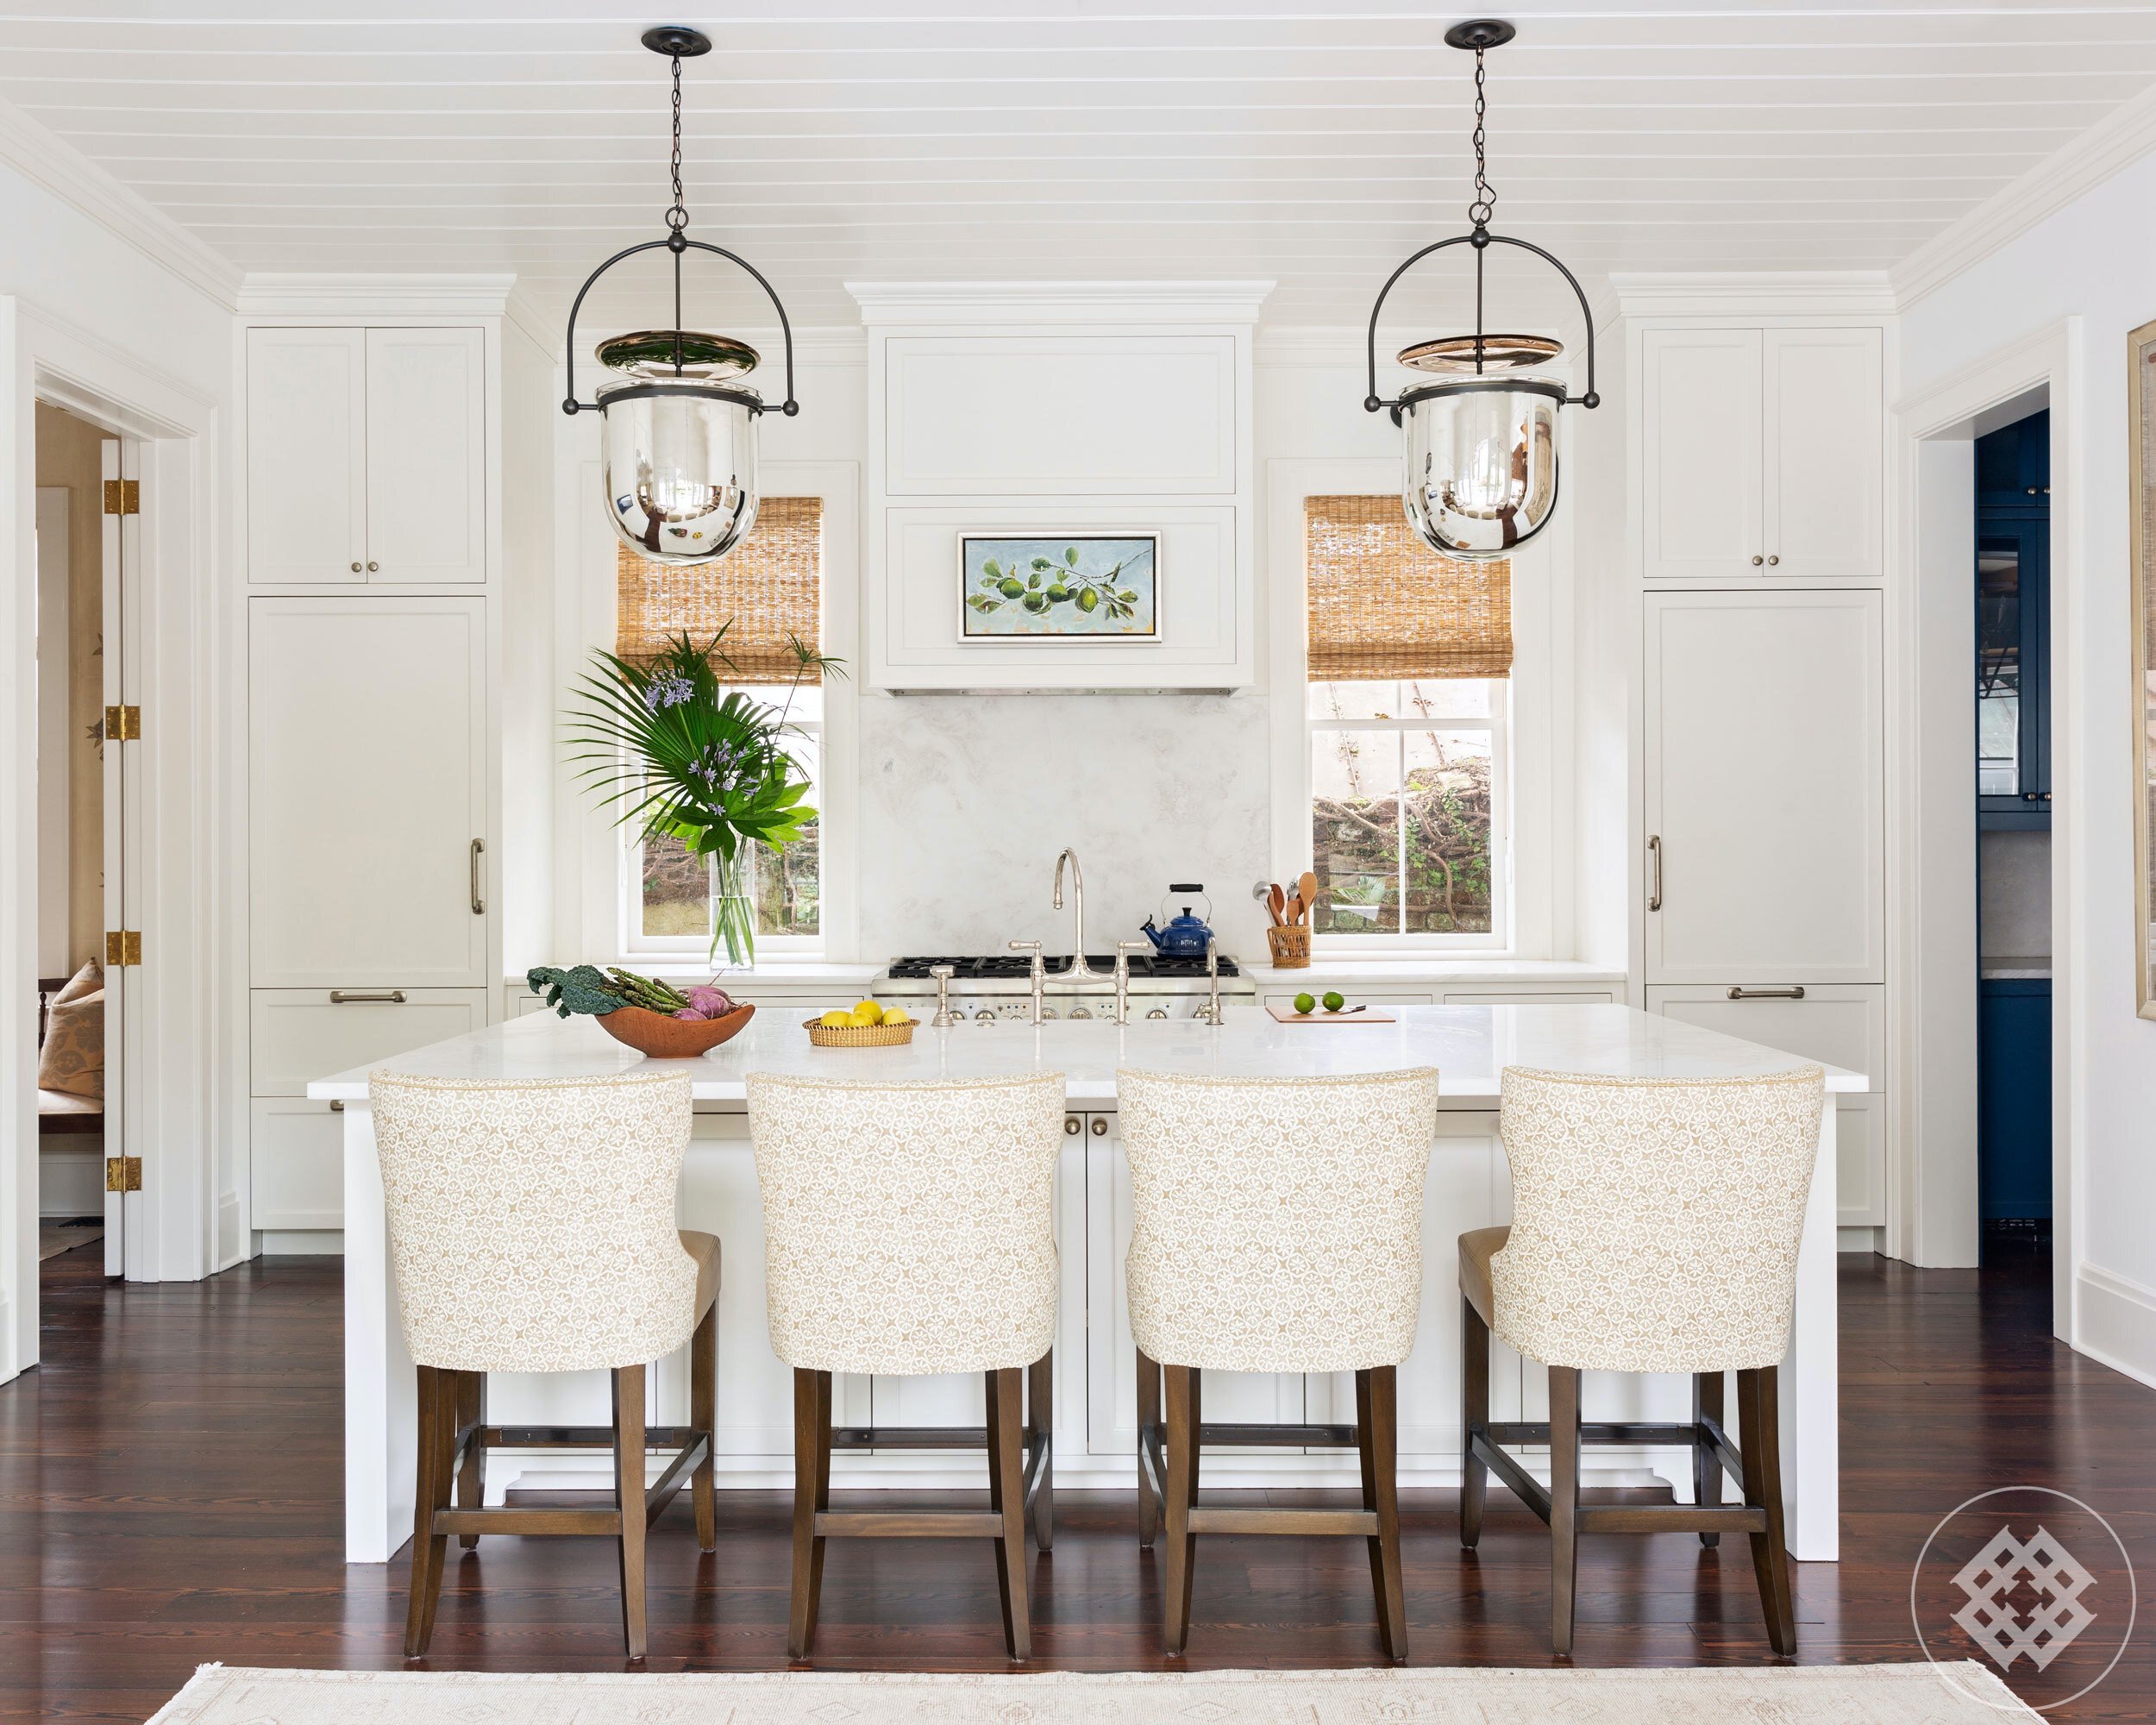 shc-10-bright-and-open-kitchen-island-with-custom-linen-and-leather-barstools-lit-by-chrome-bell-jar-urban-electric-pendants.jpg